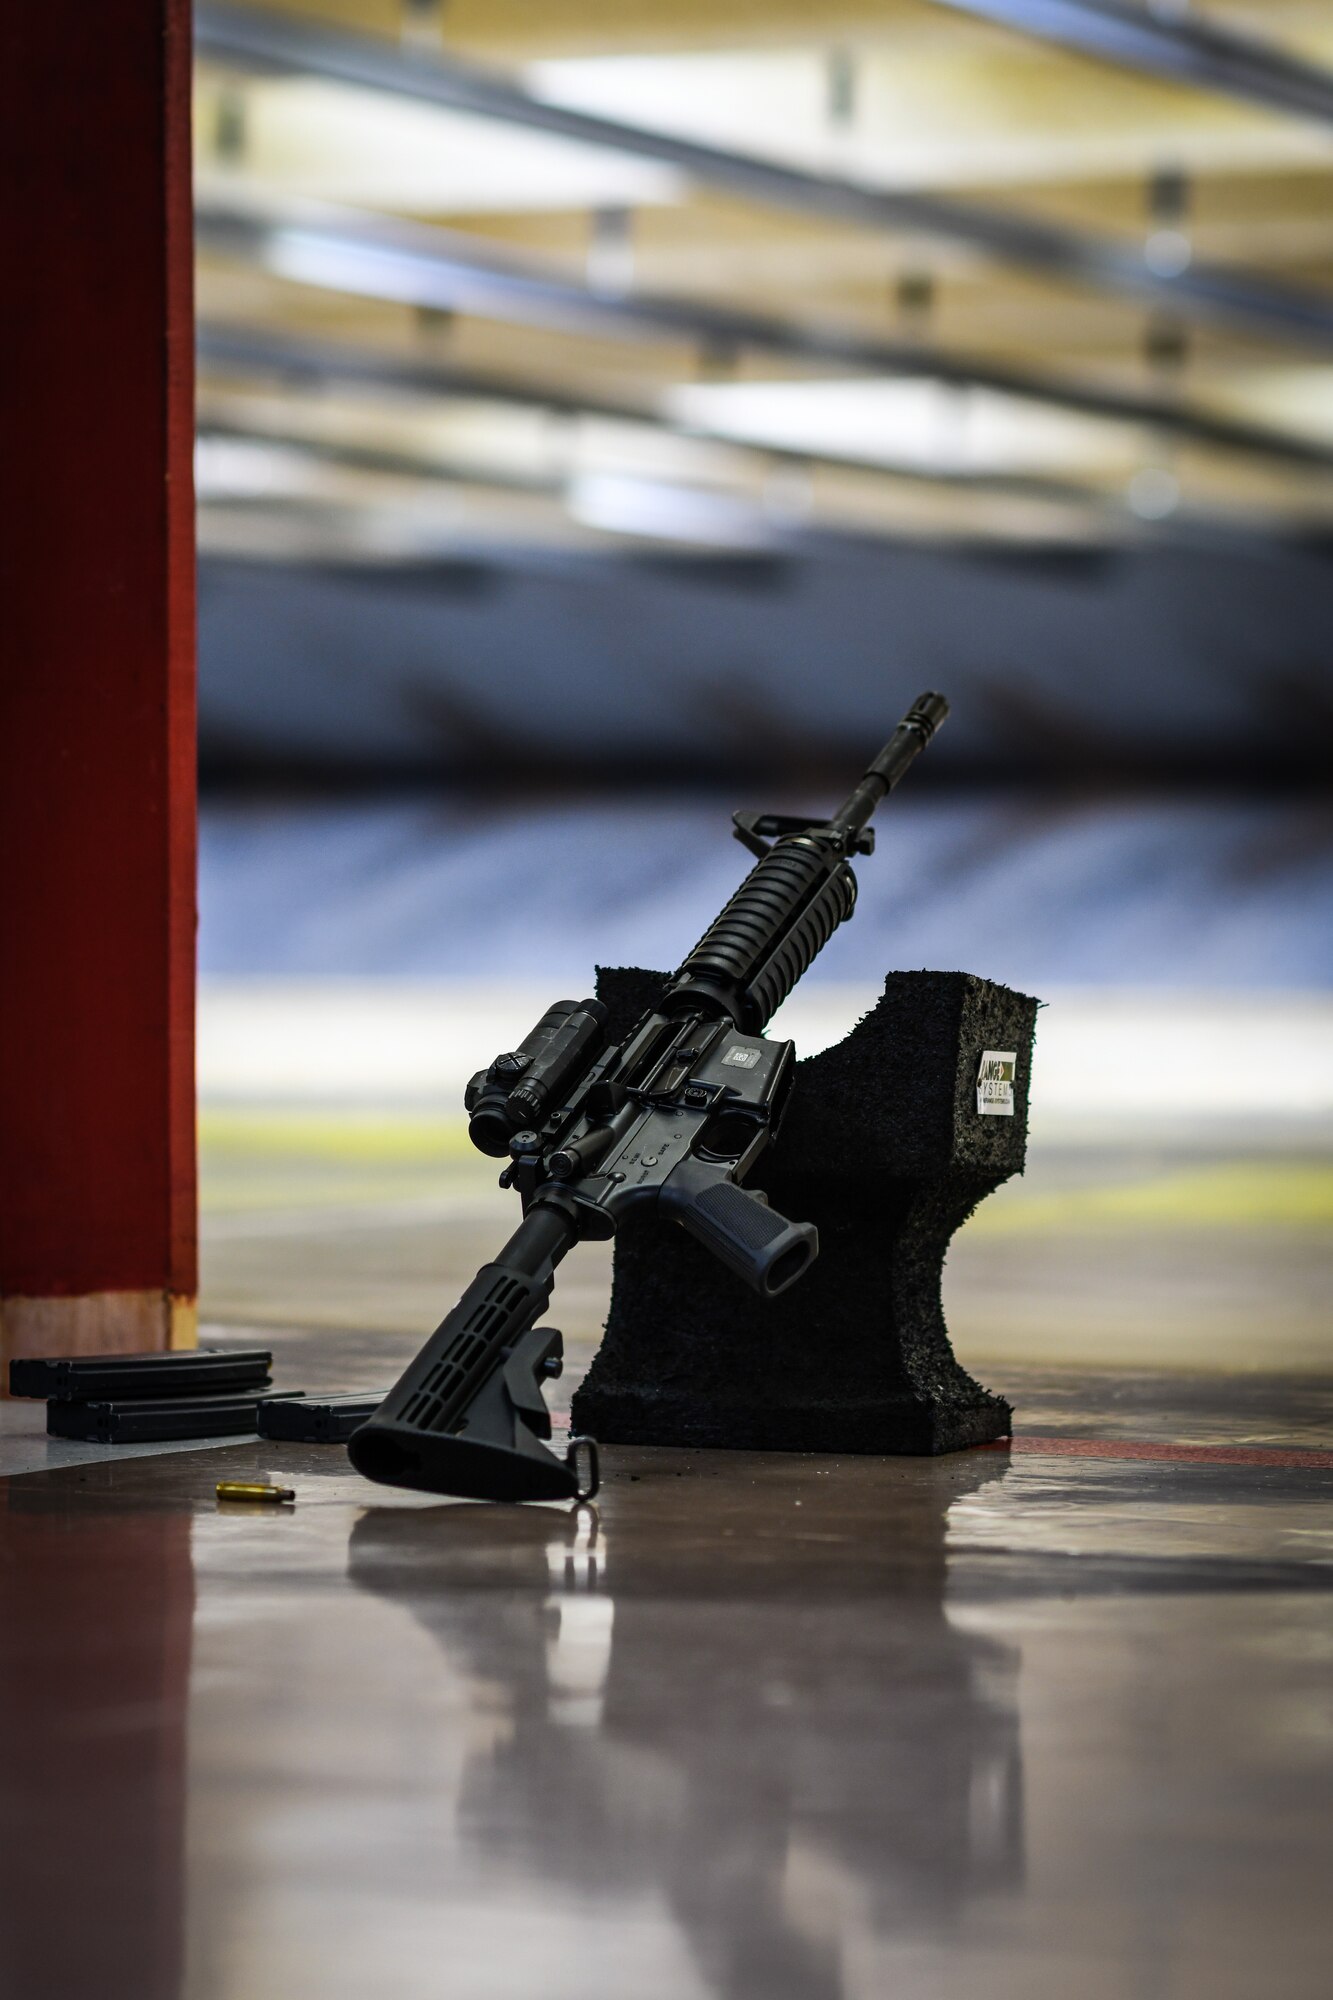 An M-4 carbine rifle leans up against a Sight-Bloc at the Combat Arms Training and Maintenance firing range, August 1, 2020, Youngstown Air Reserve Station, Ohio. The 910th Medical Squadron spent the day qualifying in combat arms, they are required to qualify every 36 months in order to remain mission ready.